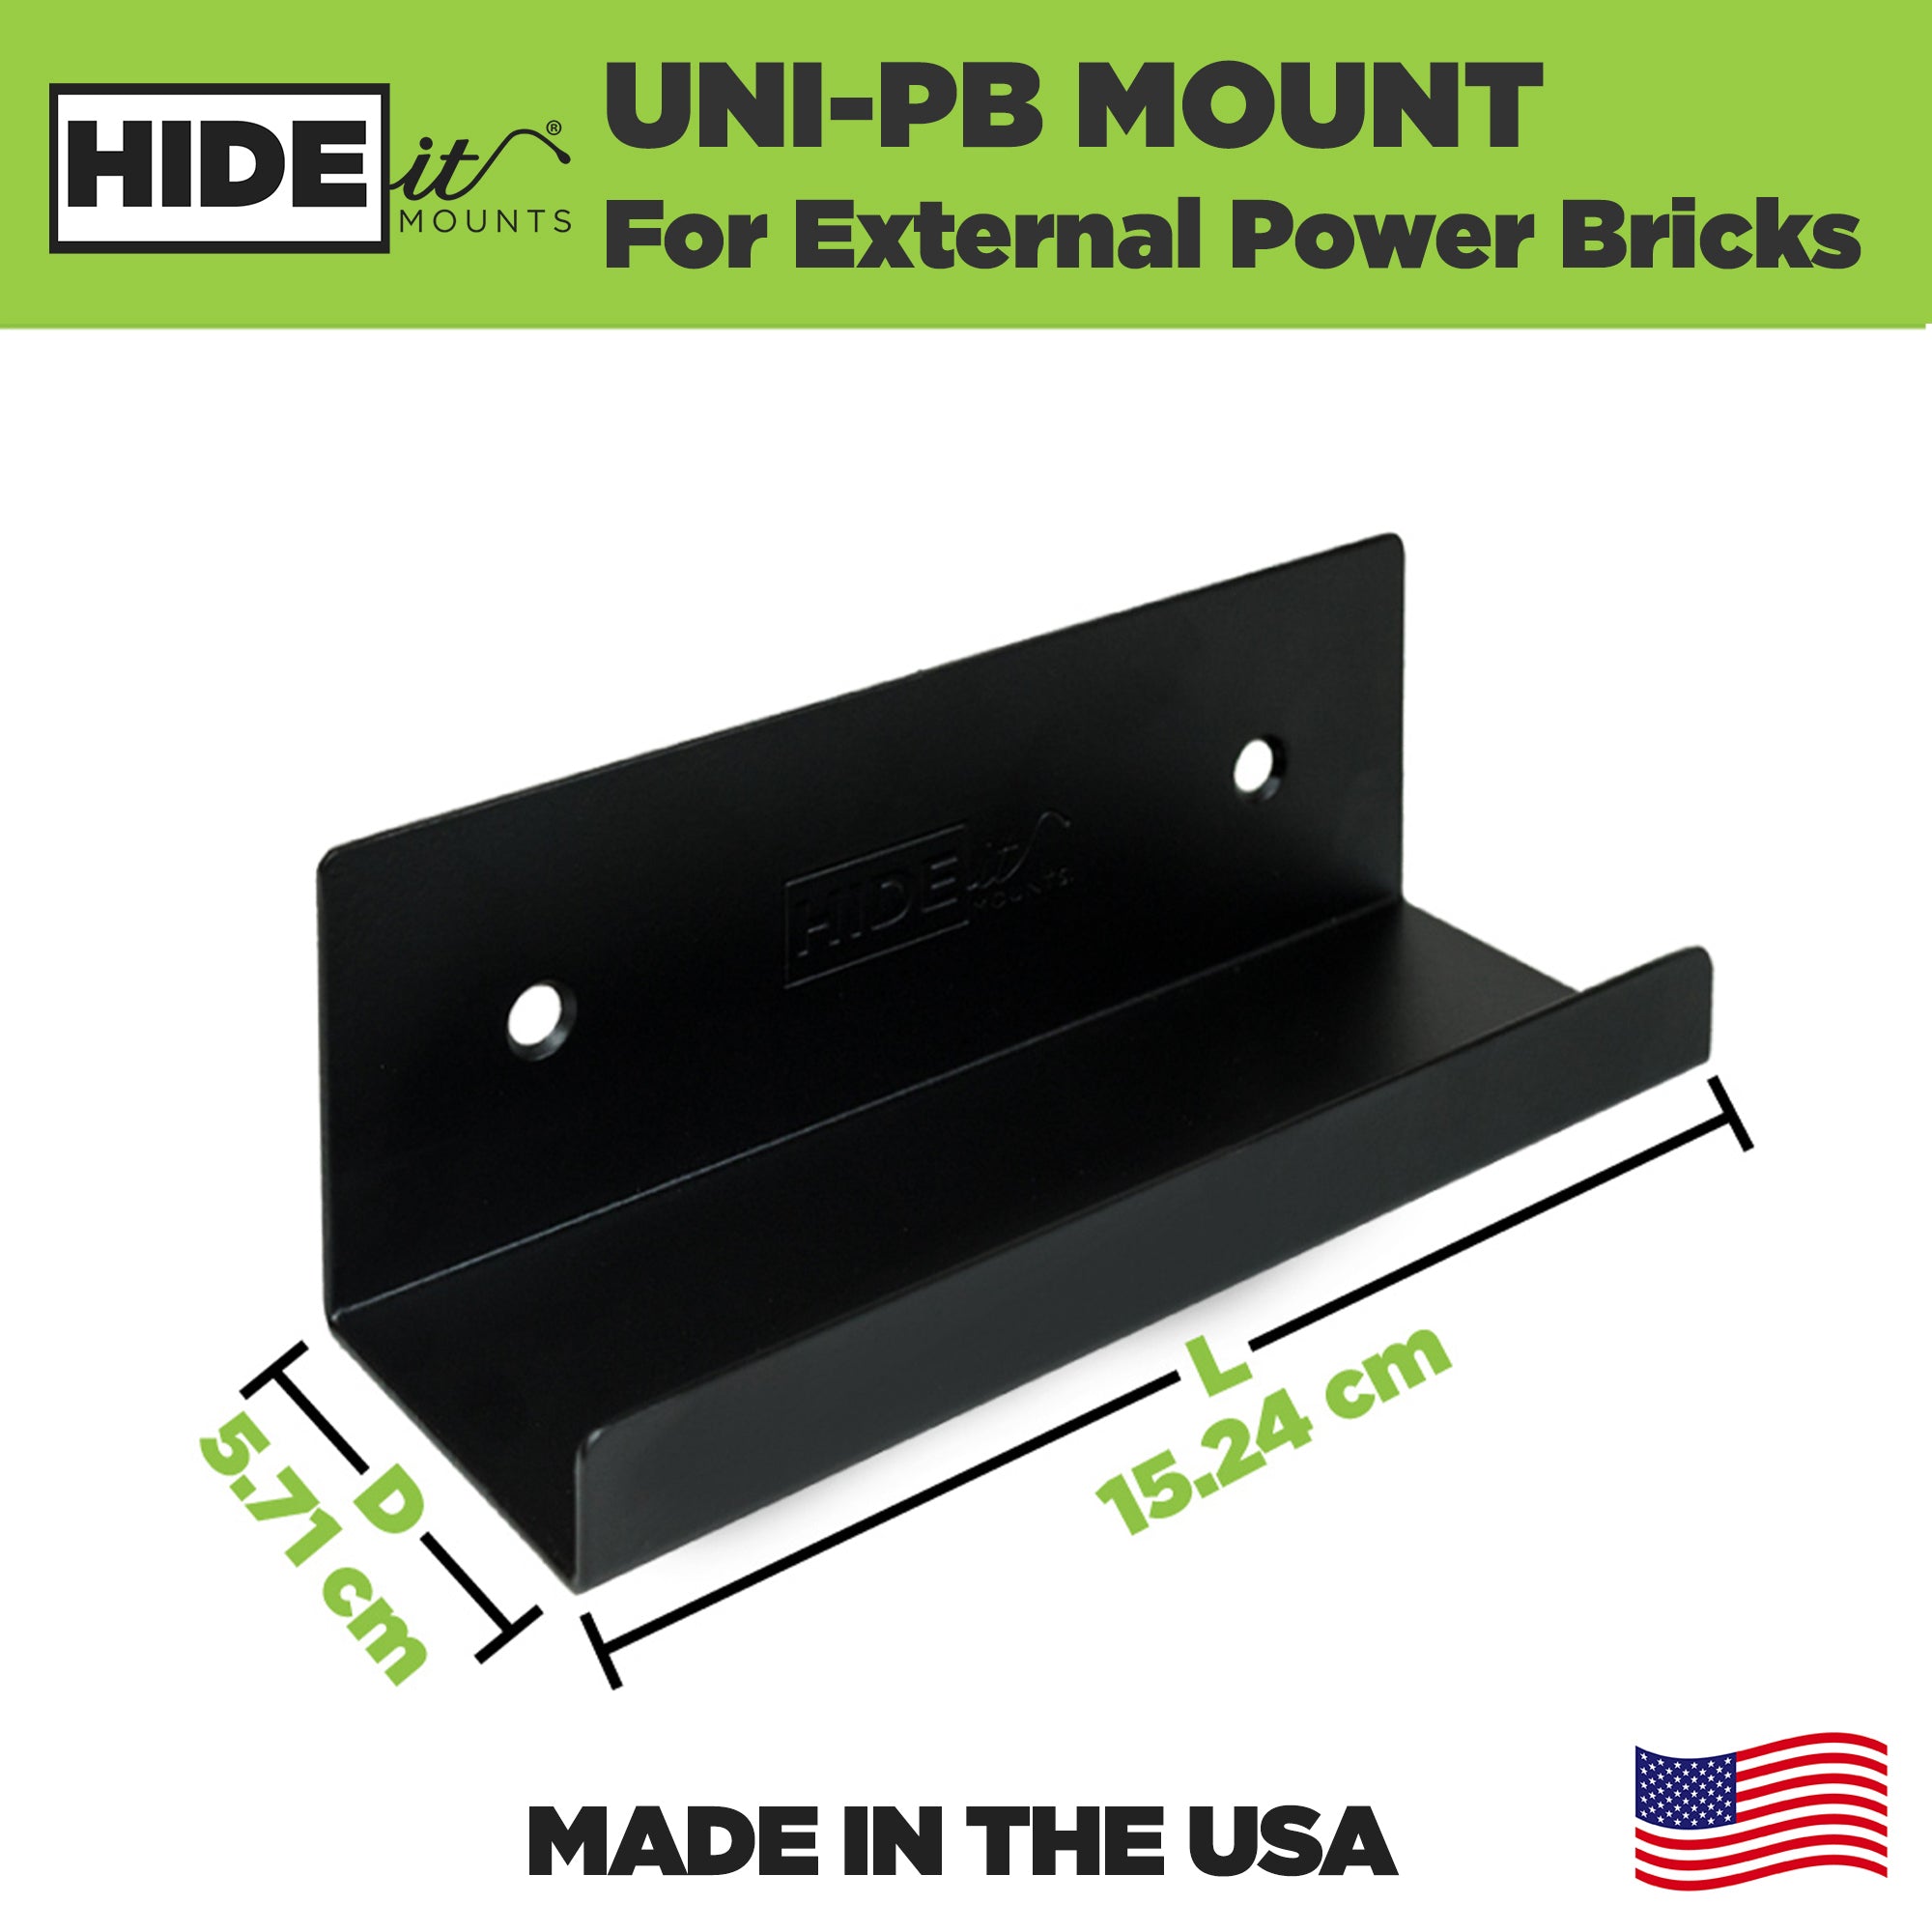 HIDEit Mounts Universal Power Brick is Made in the USA and fits most common power supplies.